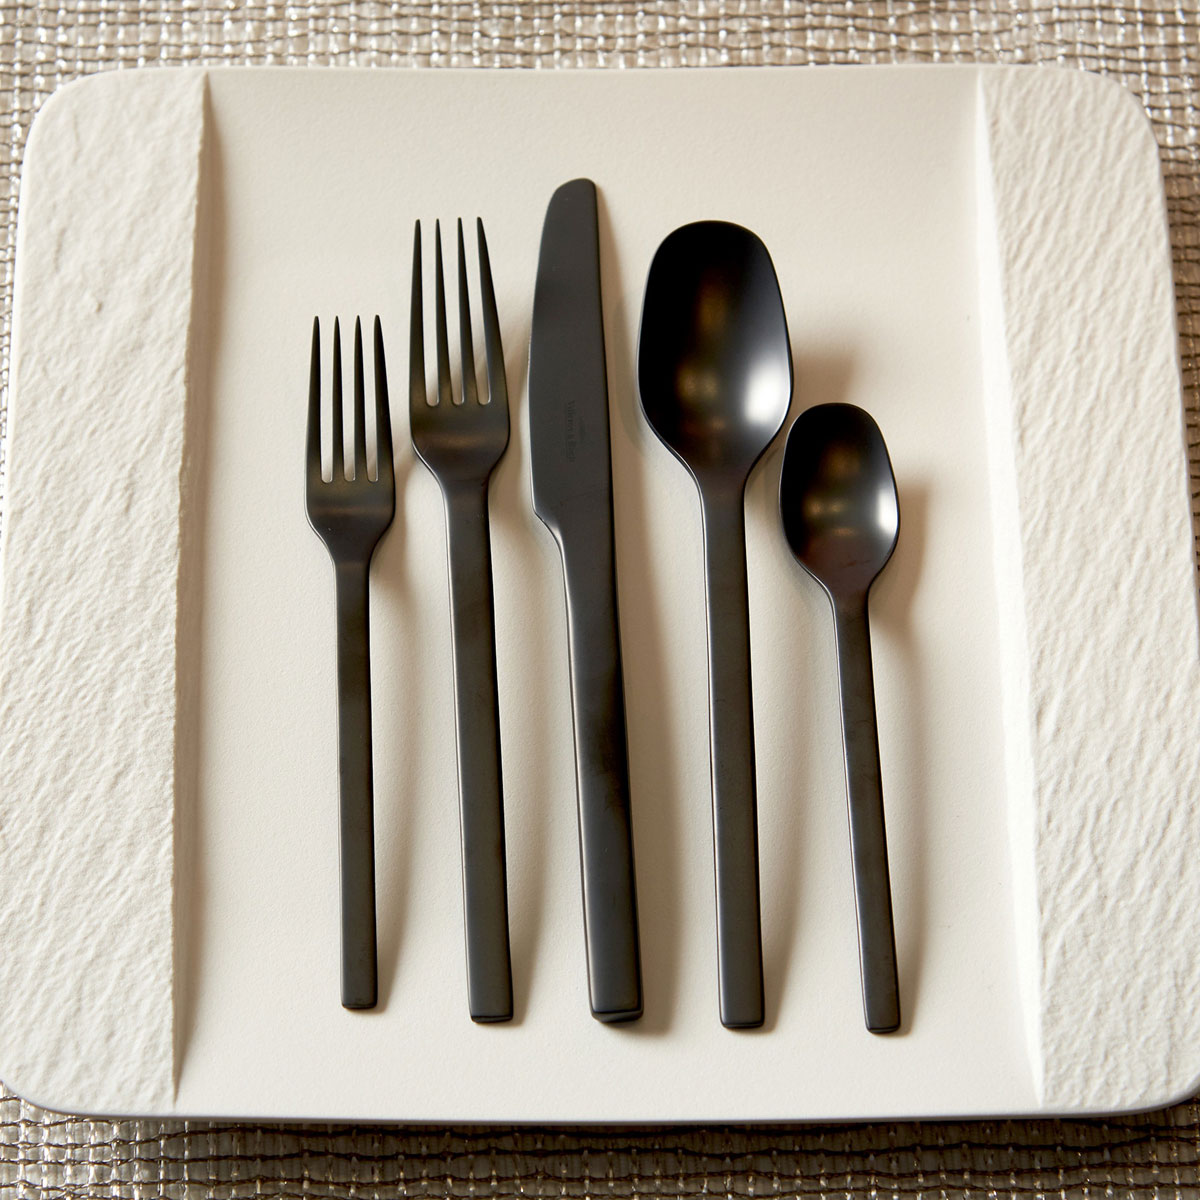 Villeroy and Boch Flatware Manufacture Cutlery 5 Piece Place Setting